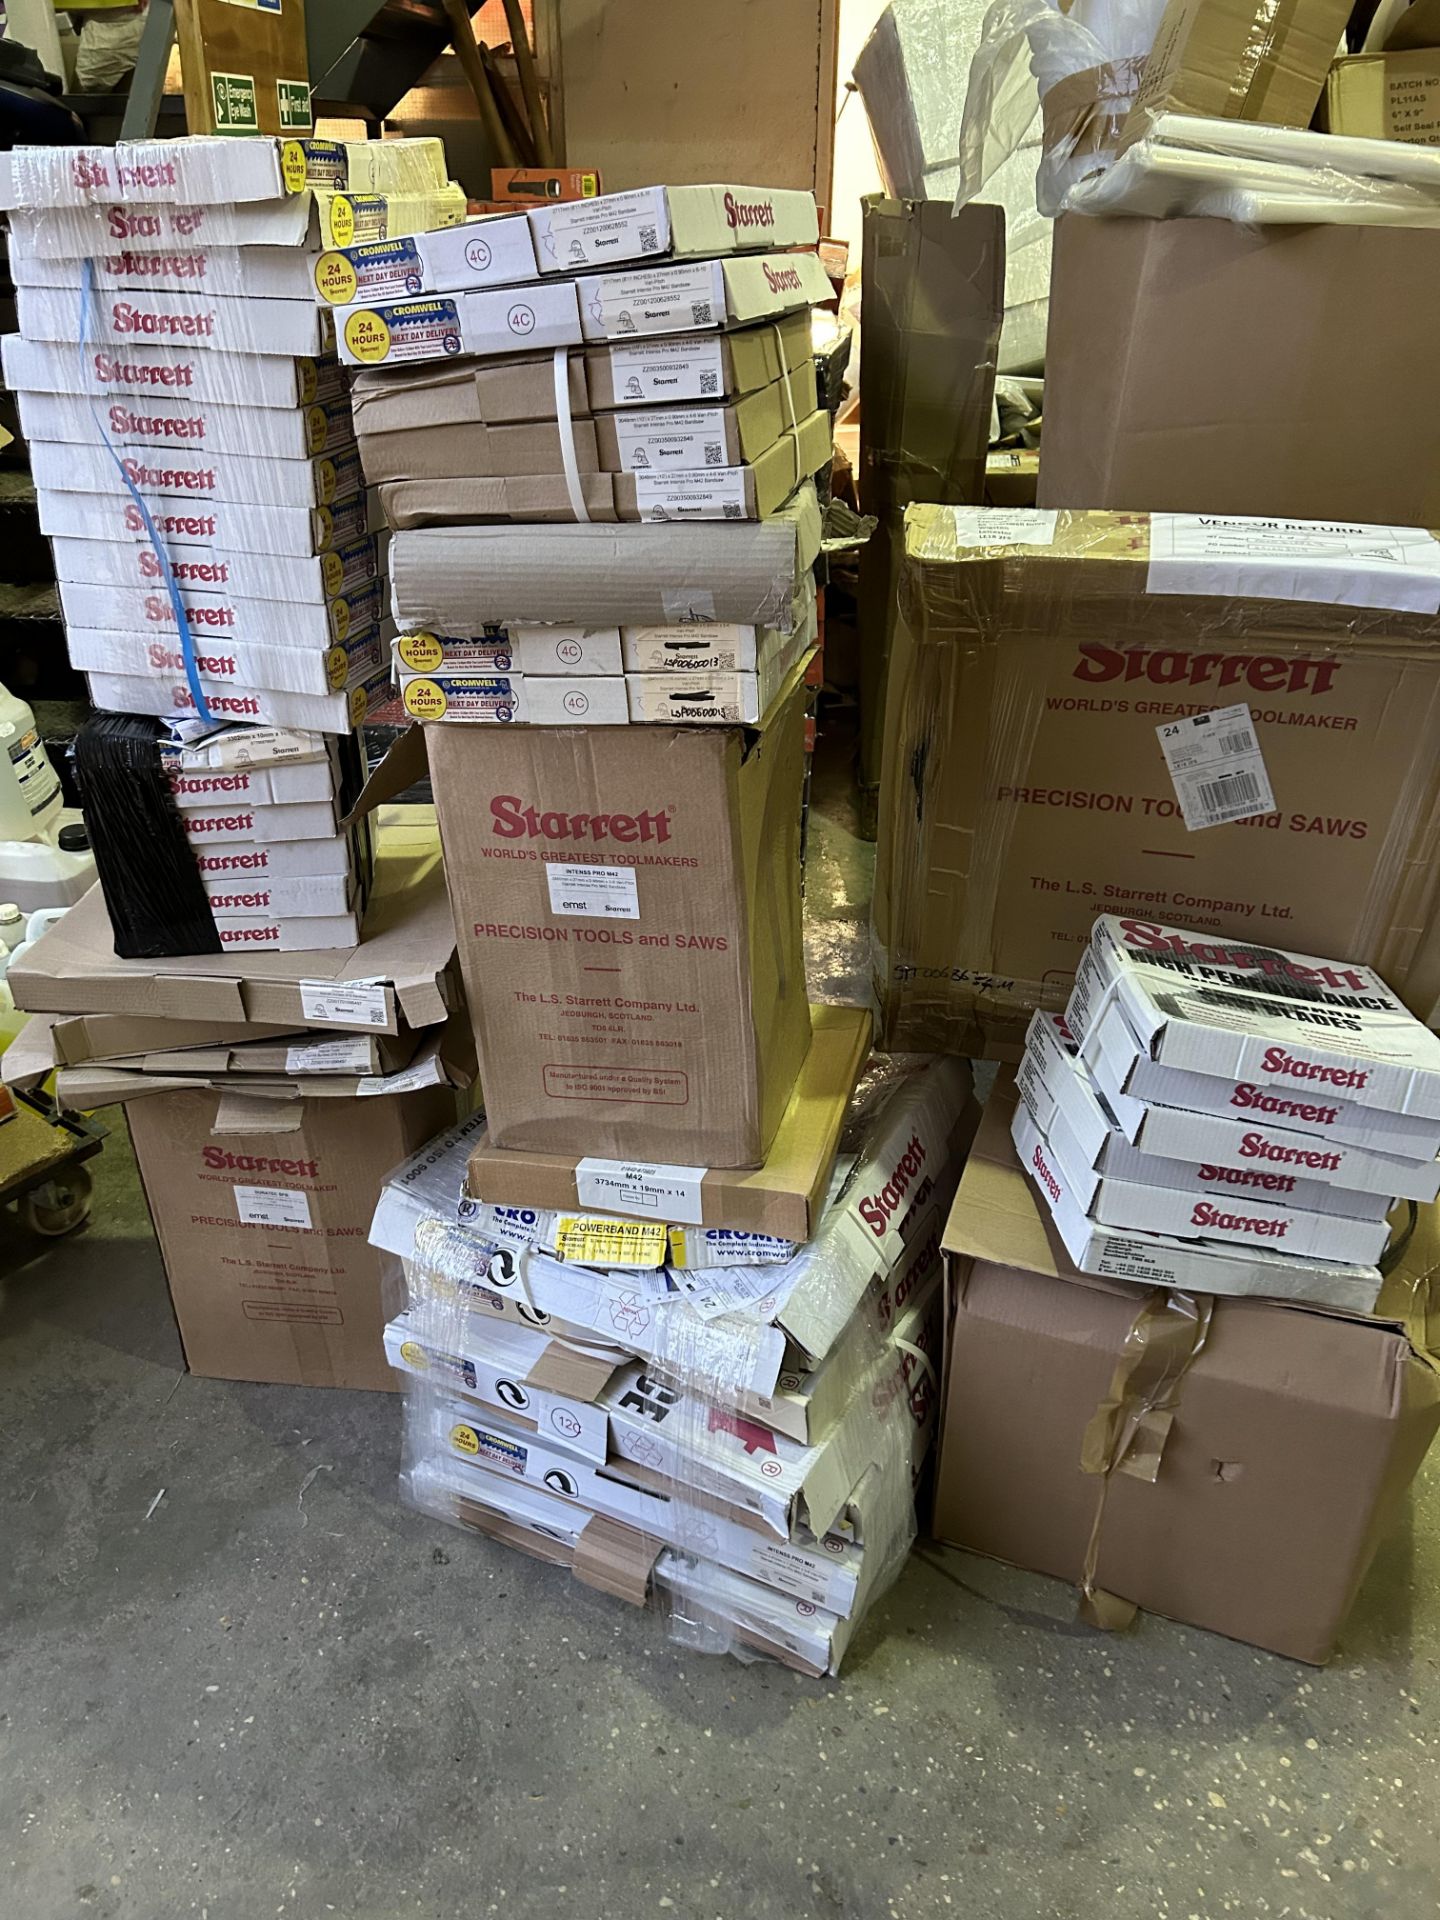 74 PACKS OF 3x STARRETT BANDSAWS IN BOXES NEW (222x BAND SAWS IN TOTAL)